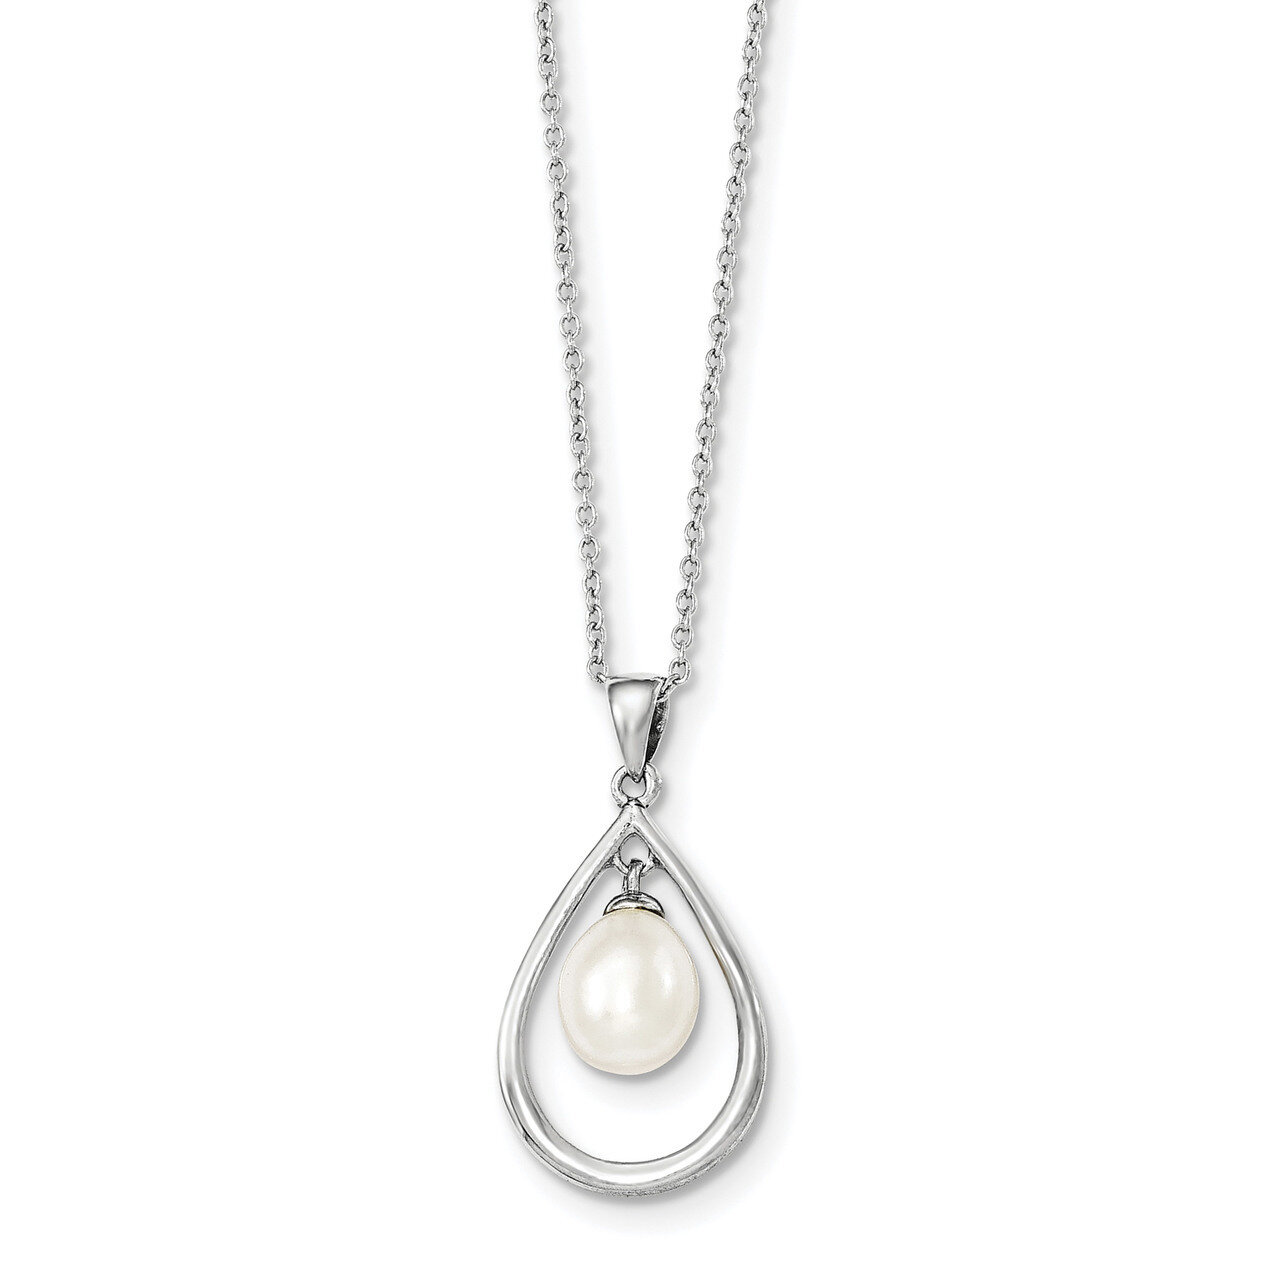 7-8mm White Freshwater Cultured Pearl Pendant Necklace 17 Inch Sterling Silver QP4628